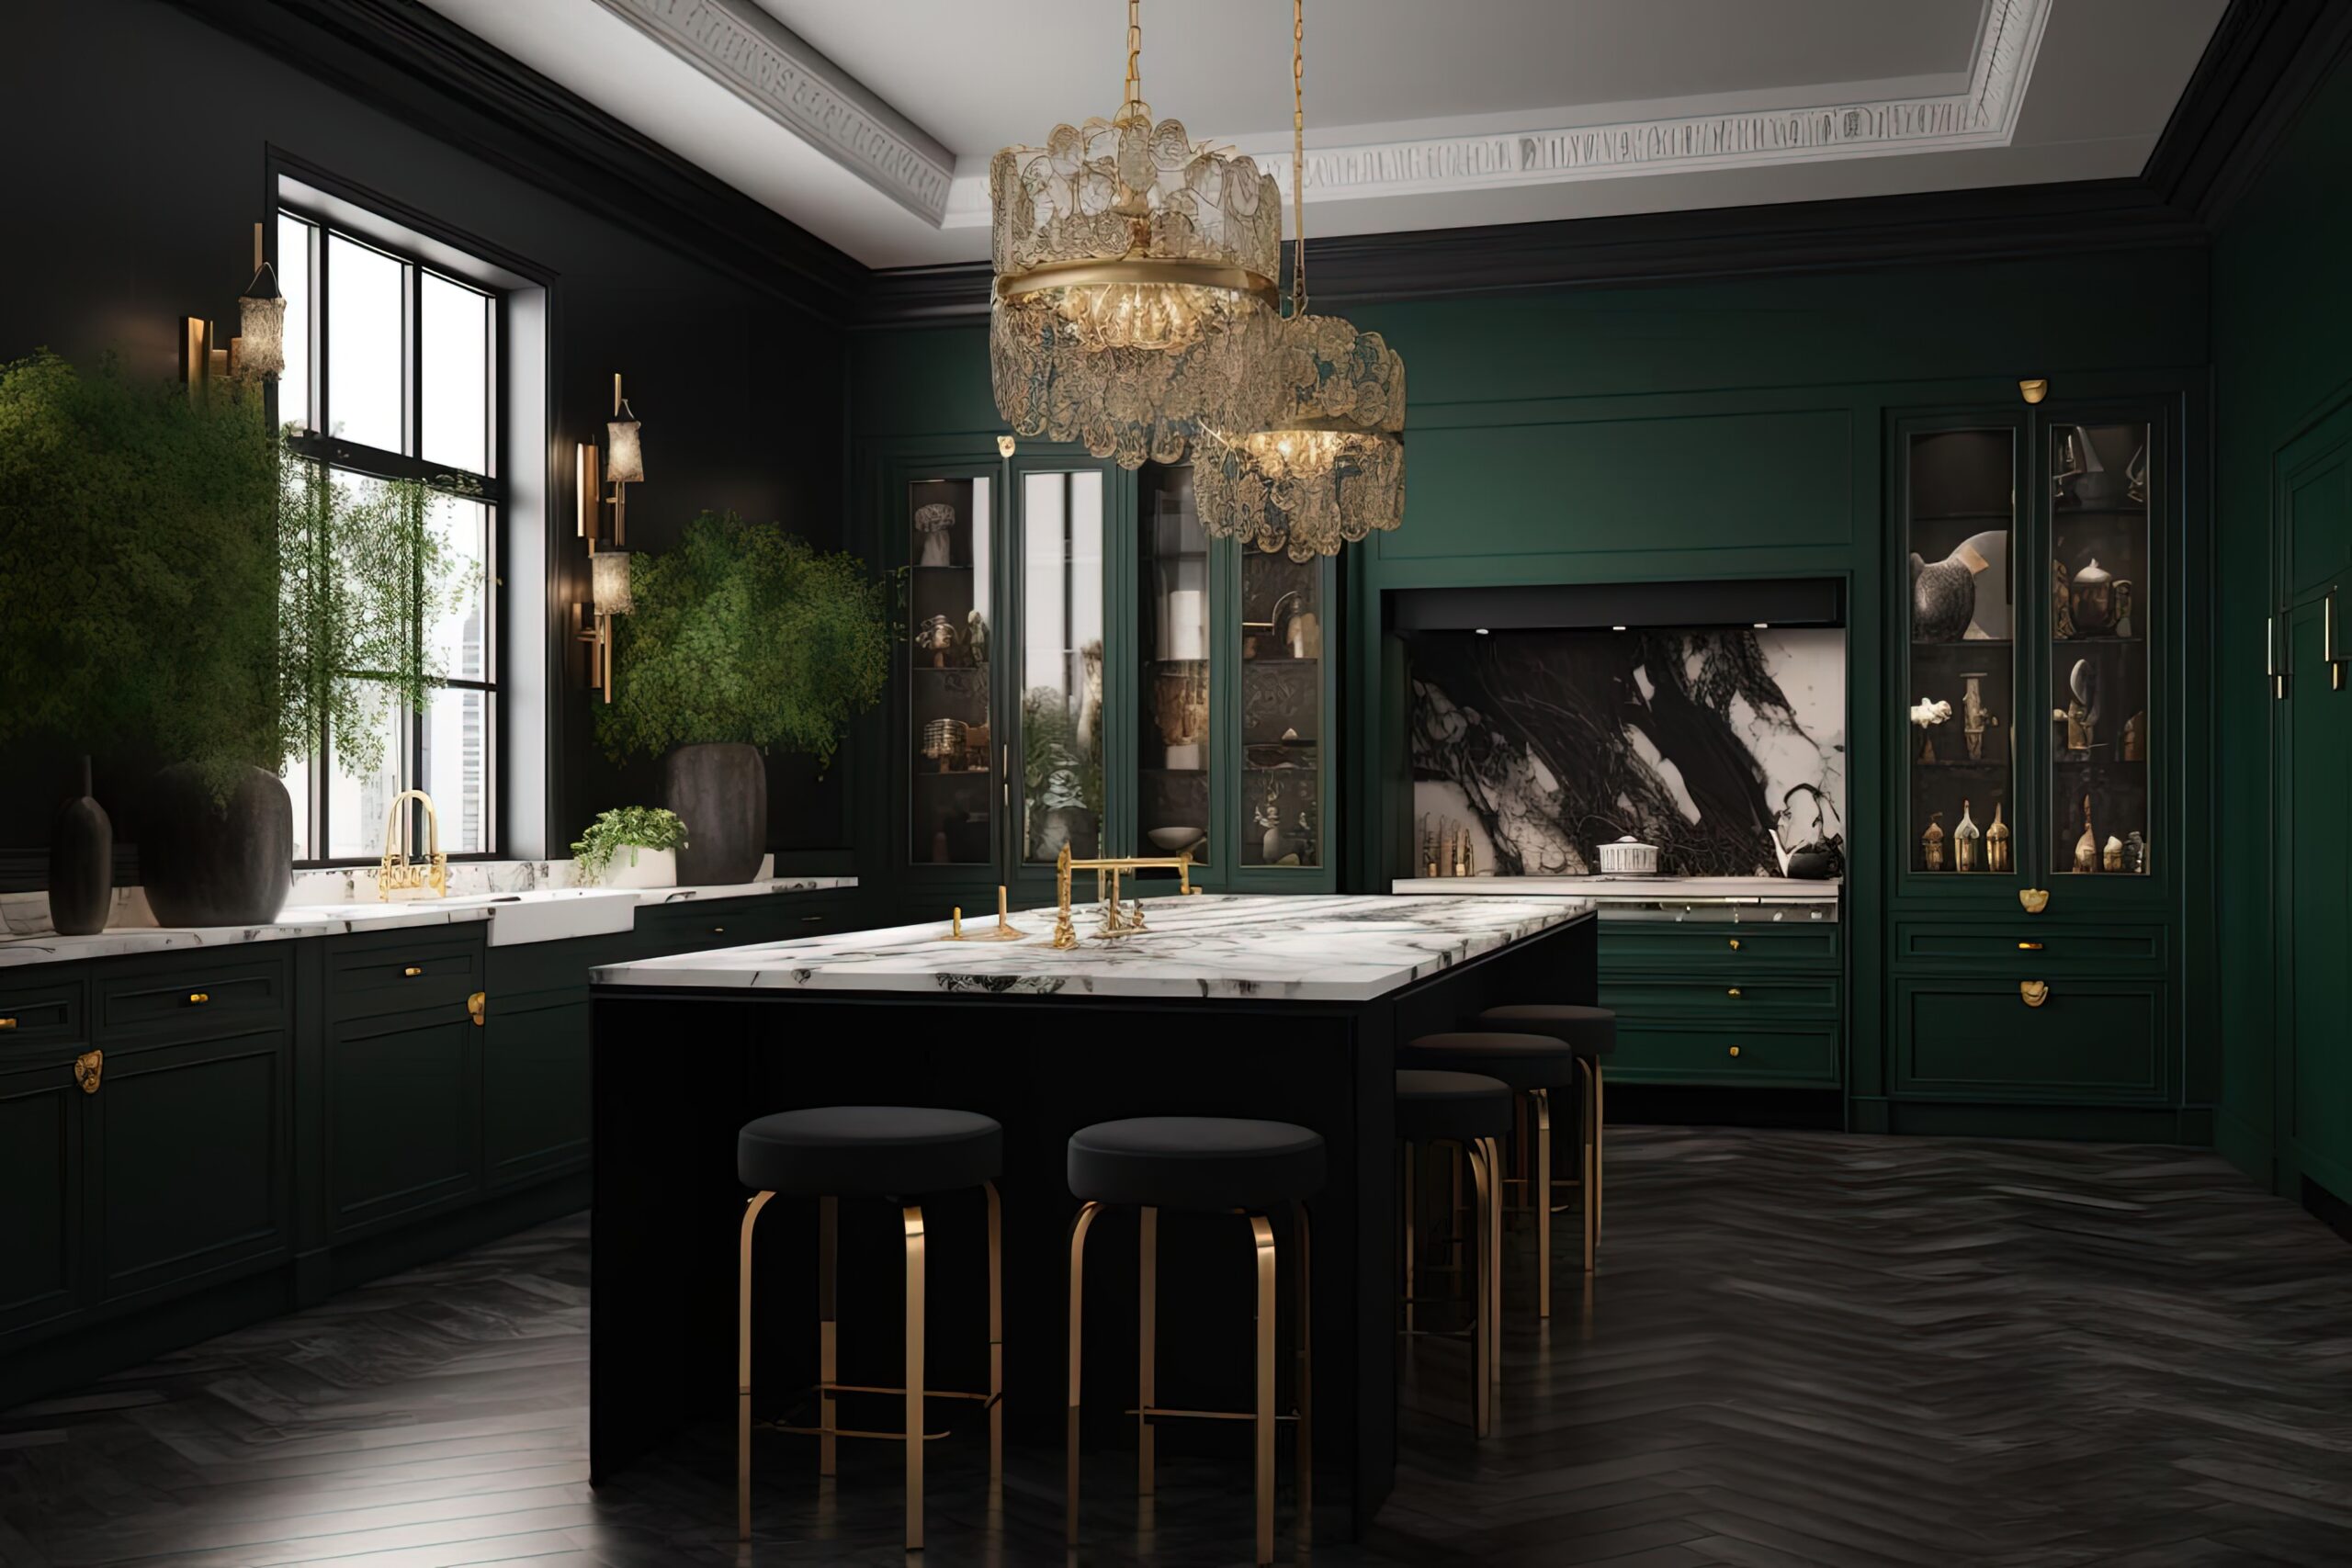 Bold glam kitchen with marble and gold accents.